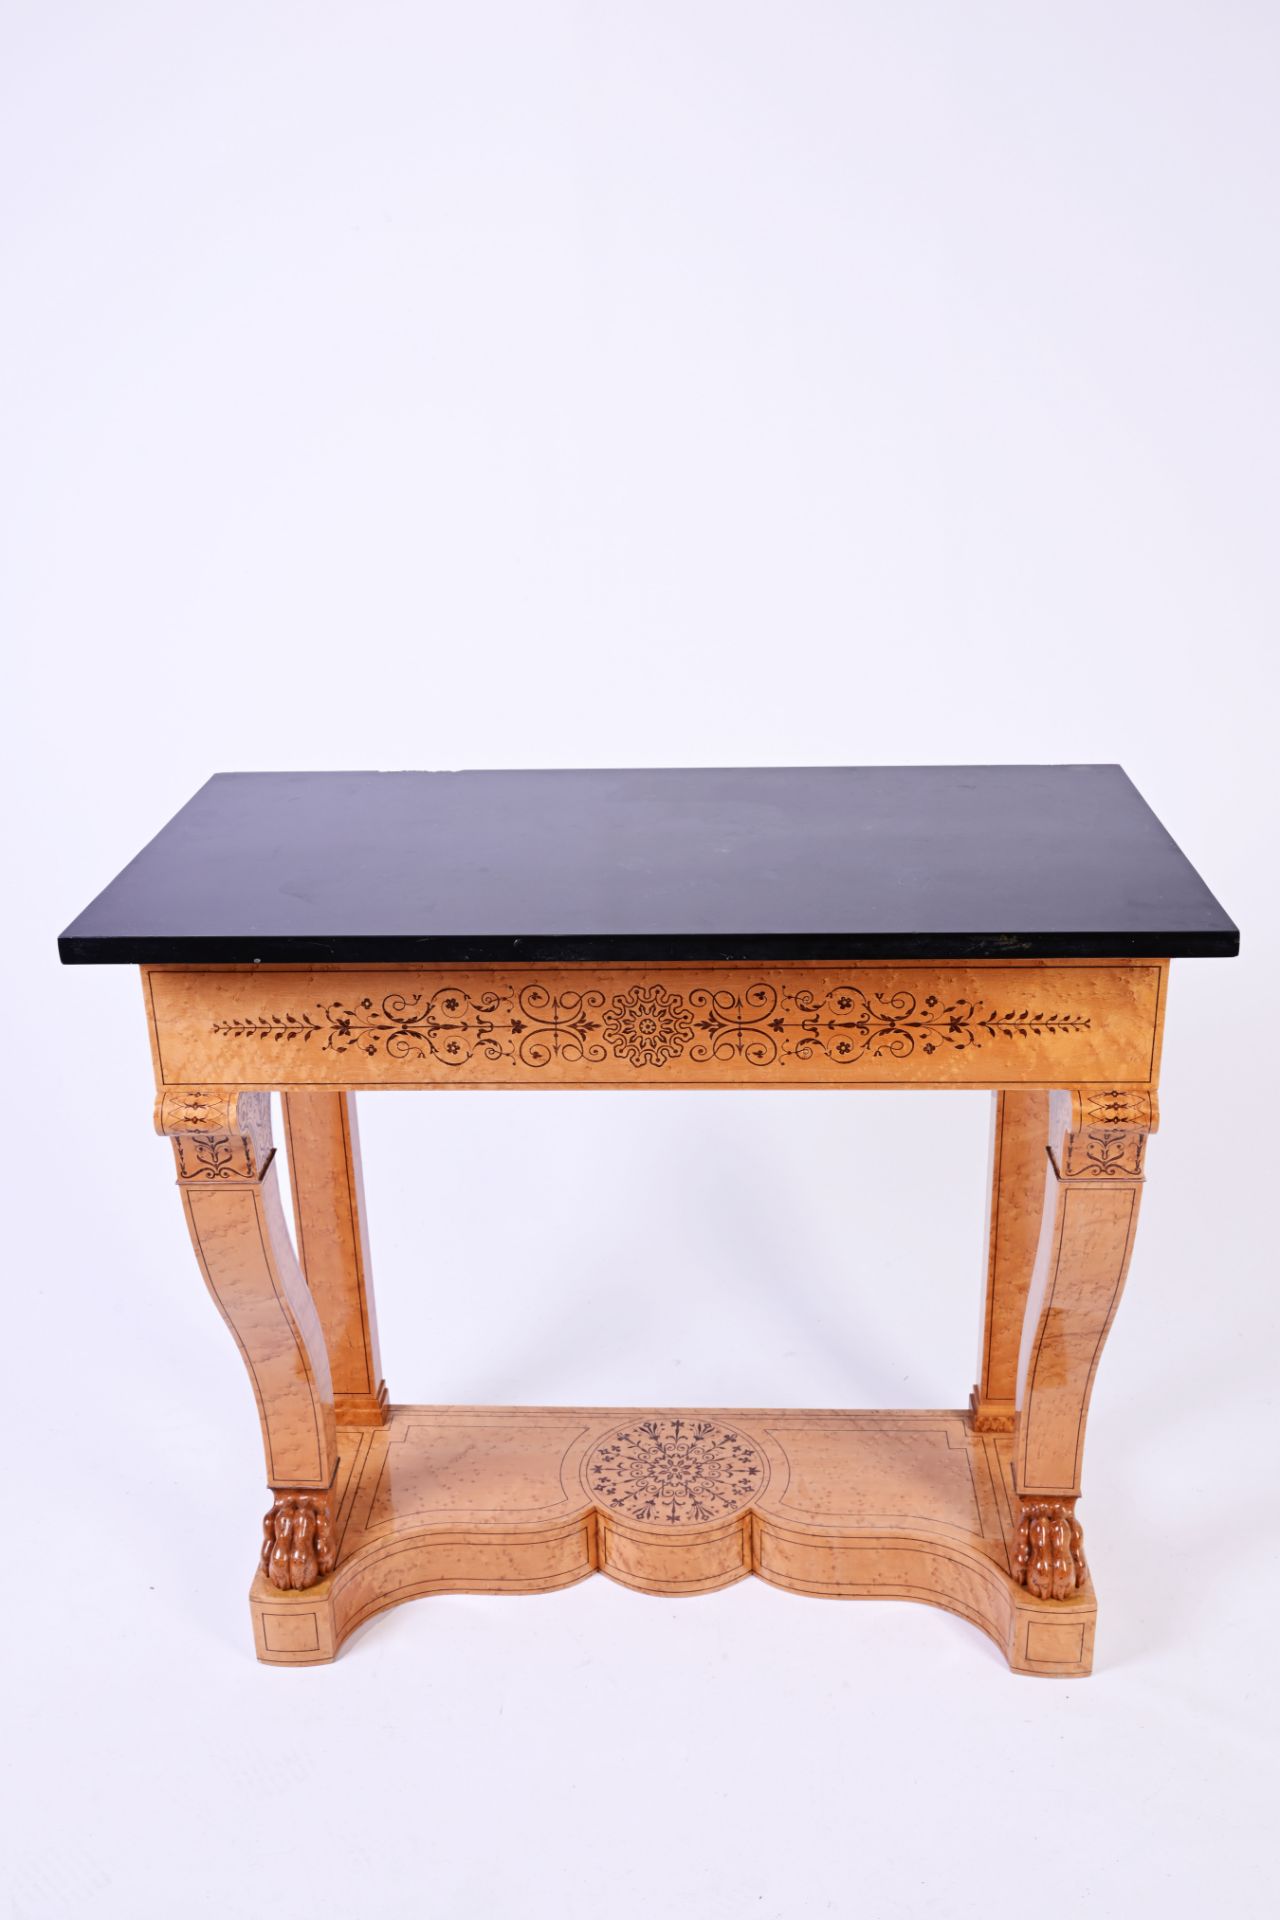 A pair of burl wood veneered Biedermeier style wall consoles with inlay and marble top, 19th/20th C. - Image 6 of 9